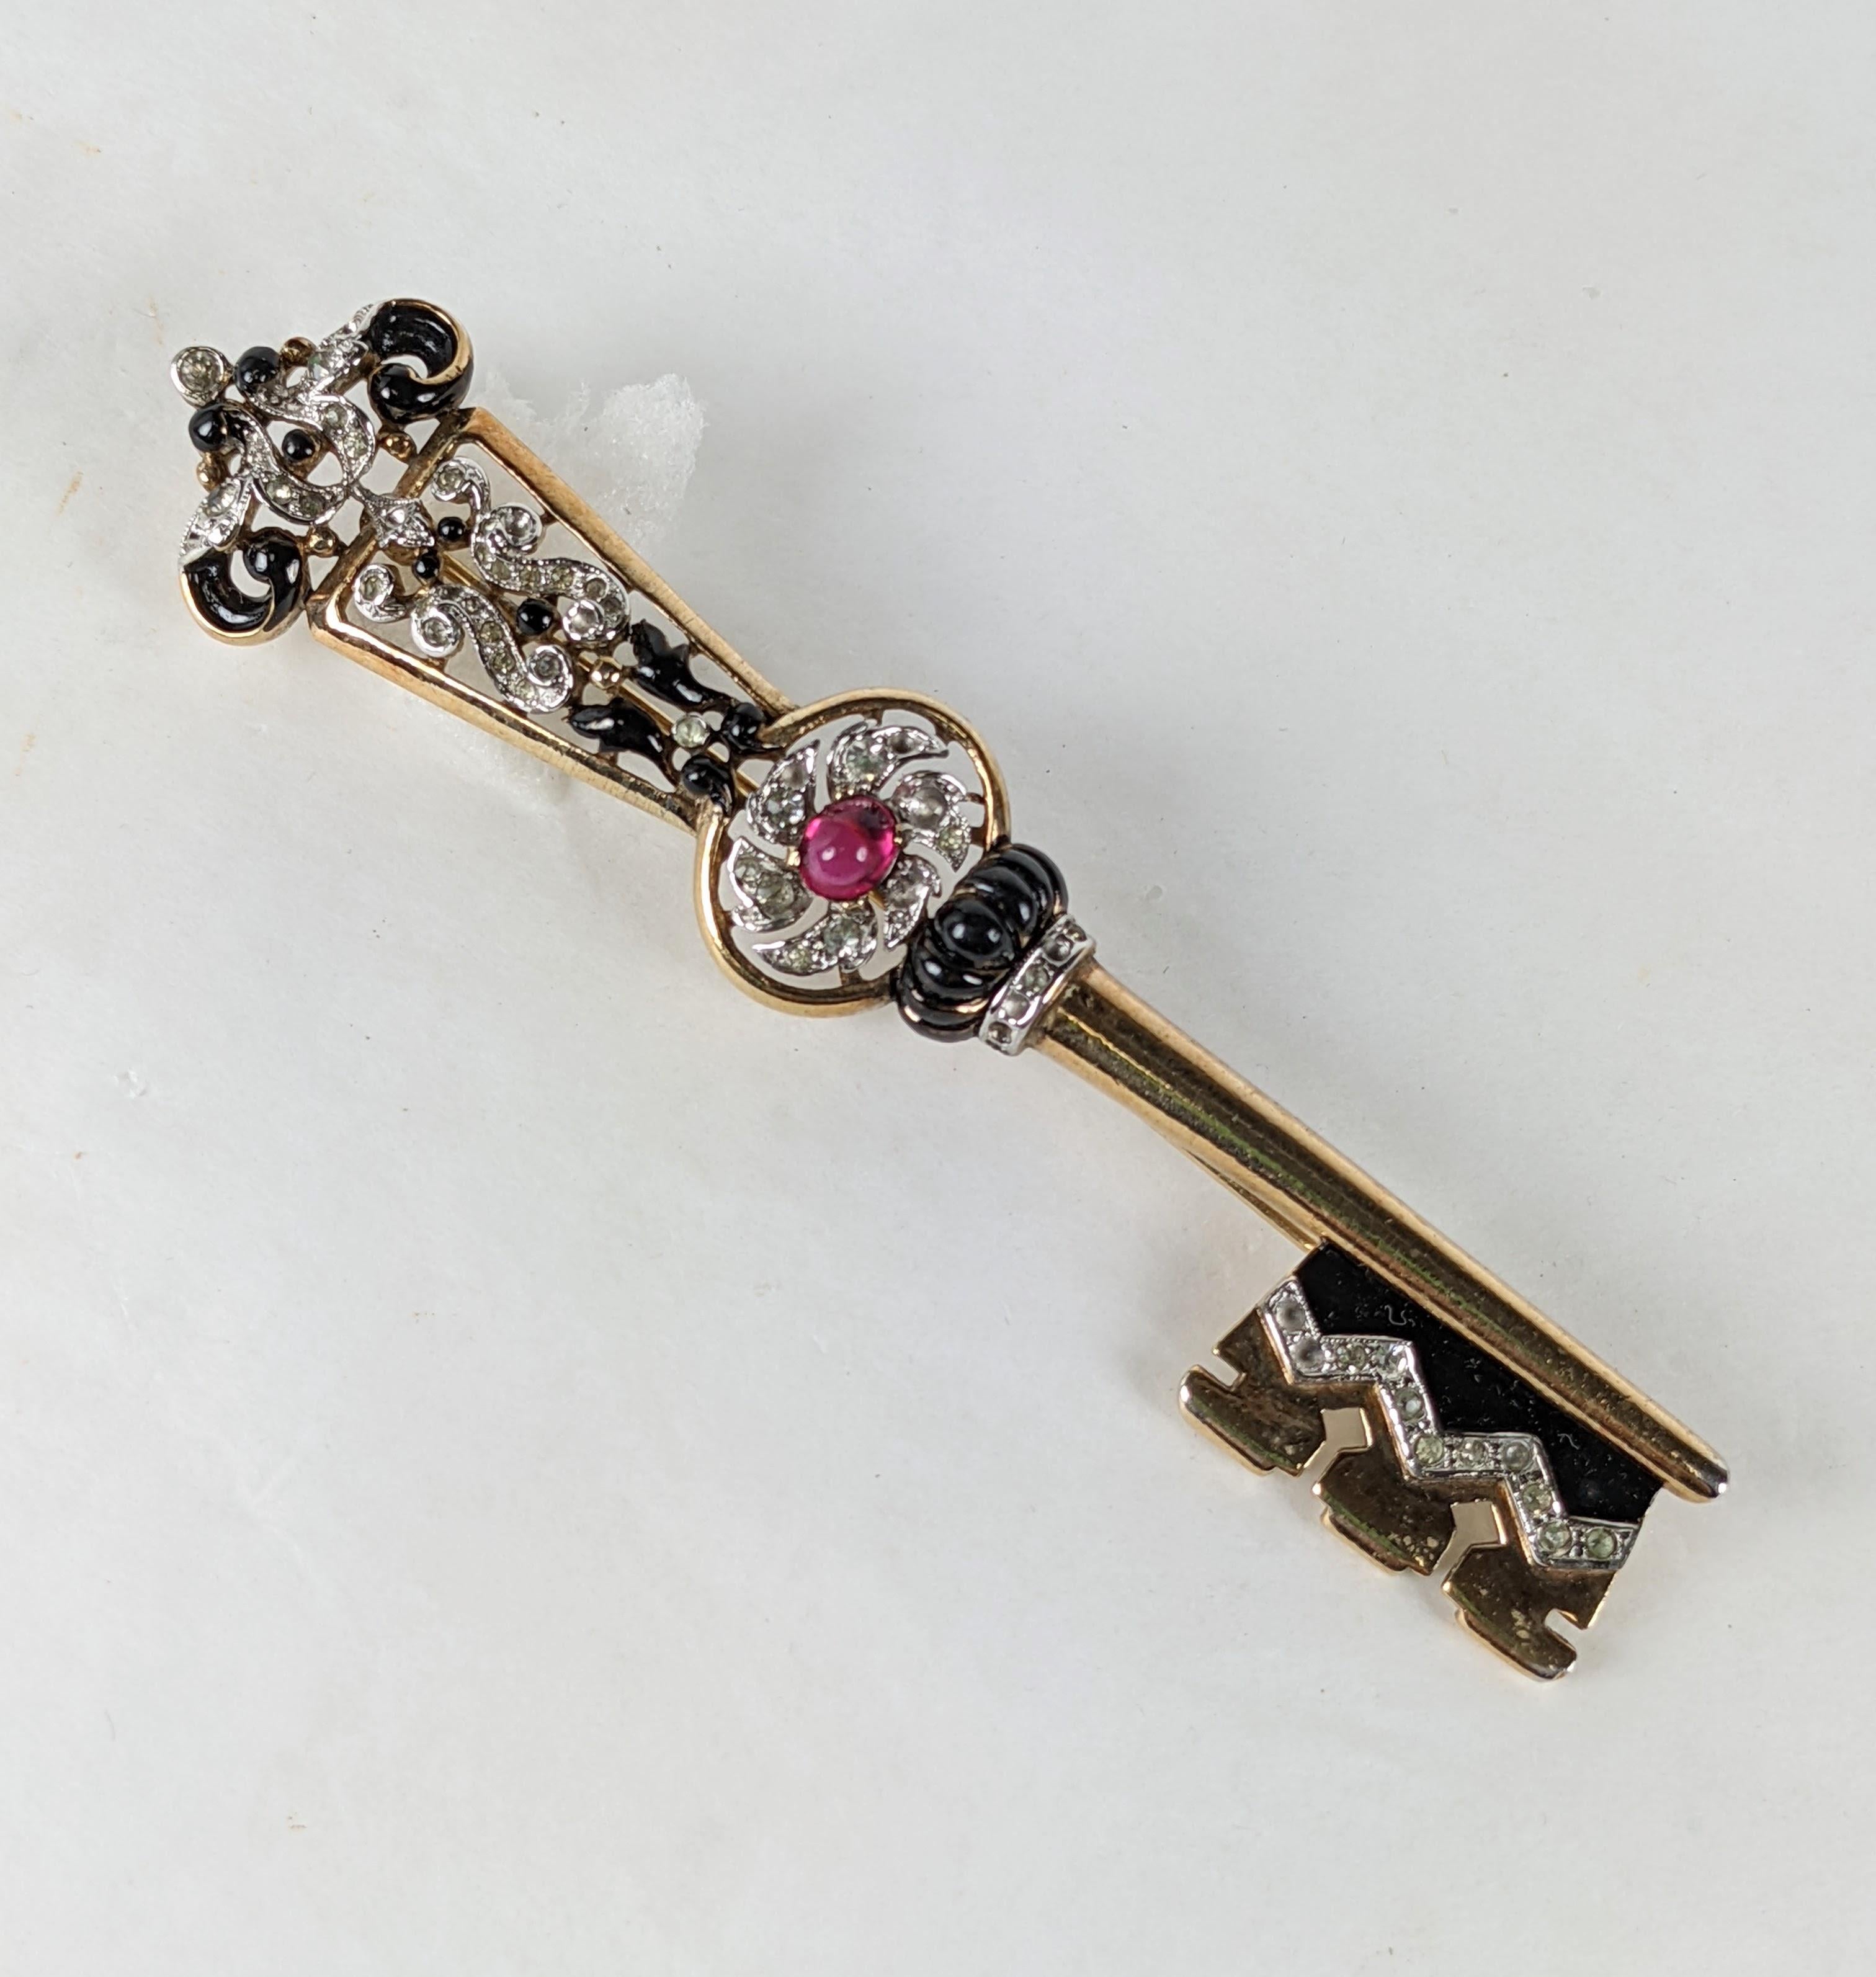 Rare Alfred Phillipe for Trifari large key brooch of rose  gold plated base metal, crystal rhinestone pave, cold  black enamel and a focal faux ruby cabochon. Very Good Condition. Marked: Trifari with Crown, Pat Pend. Length 4 1/8 